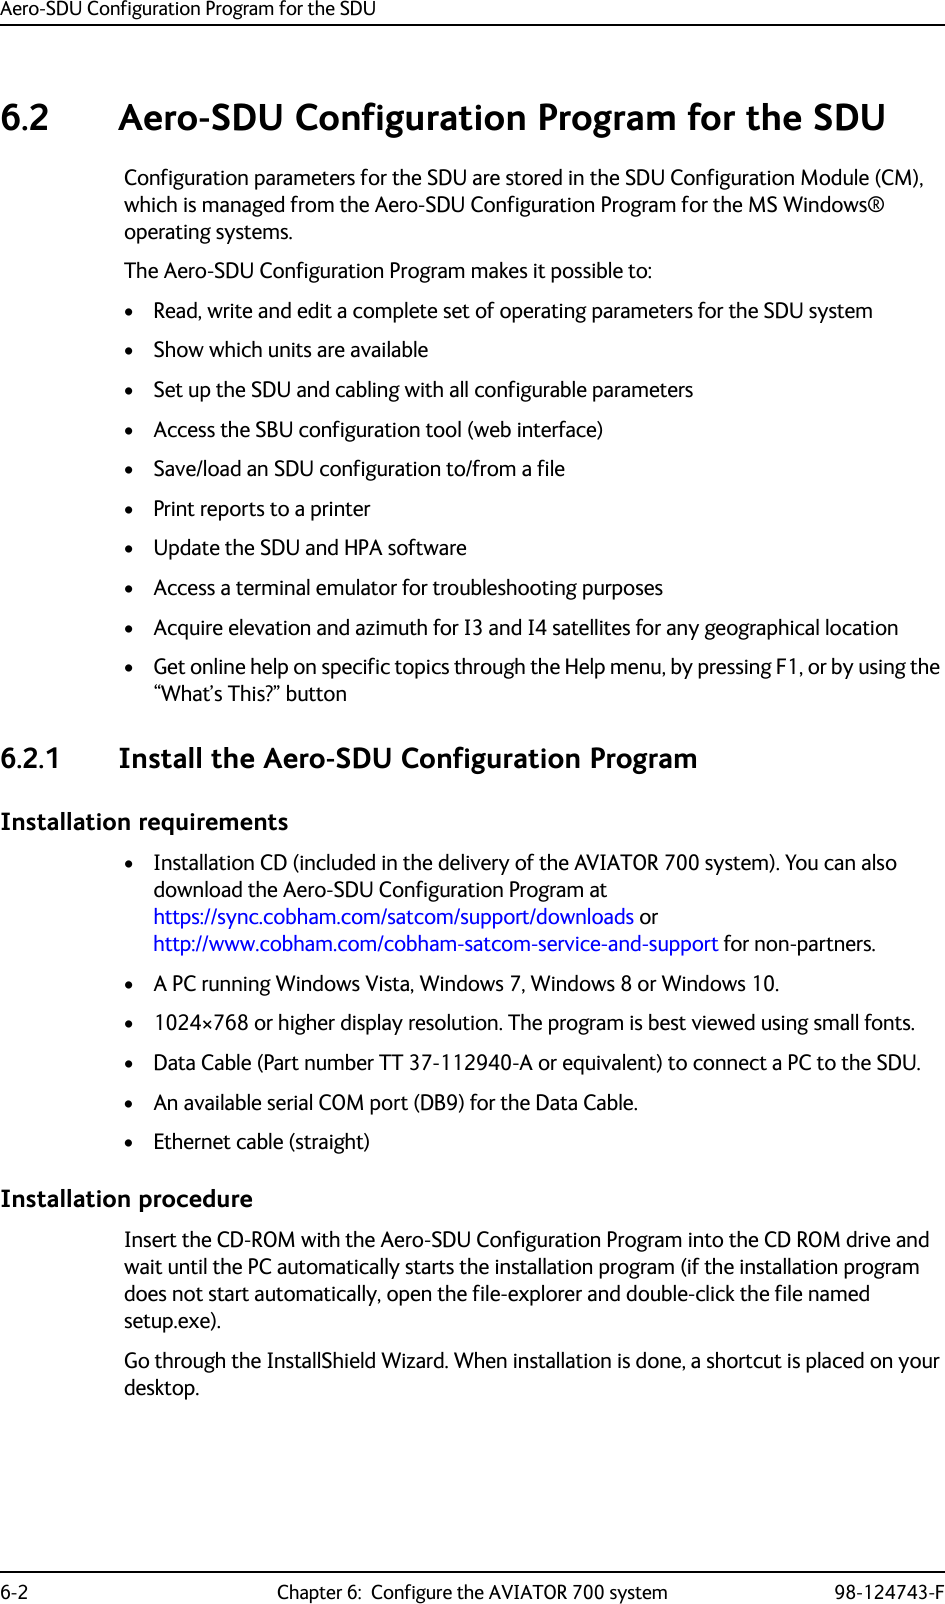 Aero-SDU Configuration Program for the SDU6-2 Chapter 6:  Configure the AVIATOR 700 system 98-124743-F6.2 Aero-SDU Configuration Program for the SDUConfiguration parameters for the SDU are stored in the SDU Configuration Module (CM), which is managed from the Aero-SDU Configuration Program for the MS Windows® operating systems.The Aero-SDU Configuration Program makes it possible to:• Read, write and edit a complete set of operating parameters for the SDU system• Show which units are available• Set up the SDU and cabling with all configurable parameters• Access the SBU configuration tool (web interface)• Save/load an SDU configuration to/from a file• Print reports to a printer•Update the SDU and HPA software• Access a terminal emulator for troubleshooting purposes• Acquire elevation and azimuth for I3 and I4 satellites for any geographical location• Get online help on specific topics through the Help menu, by pressing F1, or by using the “What’s This?” button6.2.1 Install the Aero-SDU Configuration ProgramInstallation requirements• Installation CD (included in the delivery of the AVIATOR 700 system). You can also download the Aero-SDU Configuration Program at https://sync.cobham.com/satcom/support/downloads or http://www.cobham.com/cobham-satcom-service-and-support for non-partners.• A PC running Windows Vista, Windows 7, Windows 8 or Windows 10.• 1024×768 or higher display resolution. The program is best viewed using small fonts.• Data Cable (Part number TT 37-112940-A or equivalent) to connect a PC to the SDU.• An available serial COM port (DB9) for the Data Cable.• Ethernet cable (straight)Installation procedureInsert the CD-ROM with the Aero-SDU Configuration Program into the CD ROM drive and wait until the PC automatically starts the installation program (if the installation program does not start automatically, open the file-explorer and double-click the file named setup.exe).Go through the InstallShield Wizard. When installation is done, a shortcut is placed on your desktop.